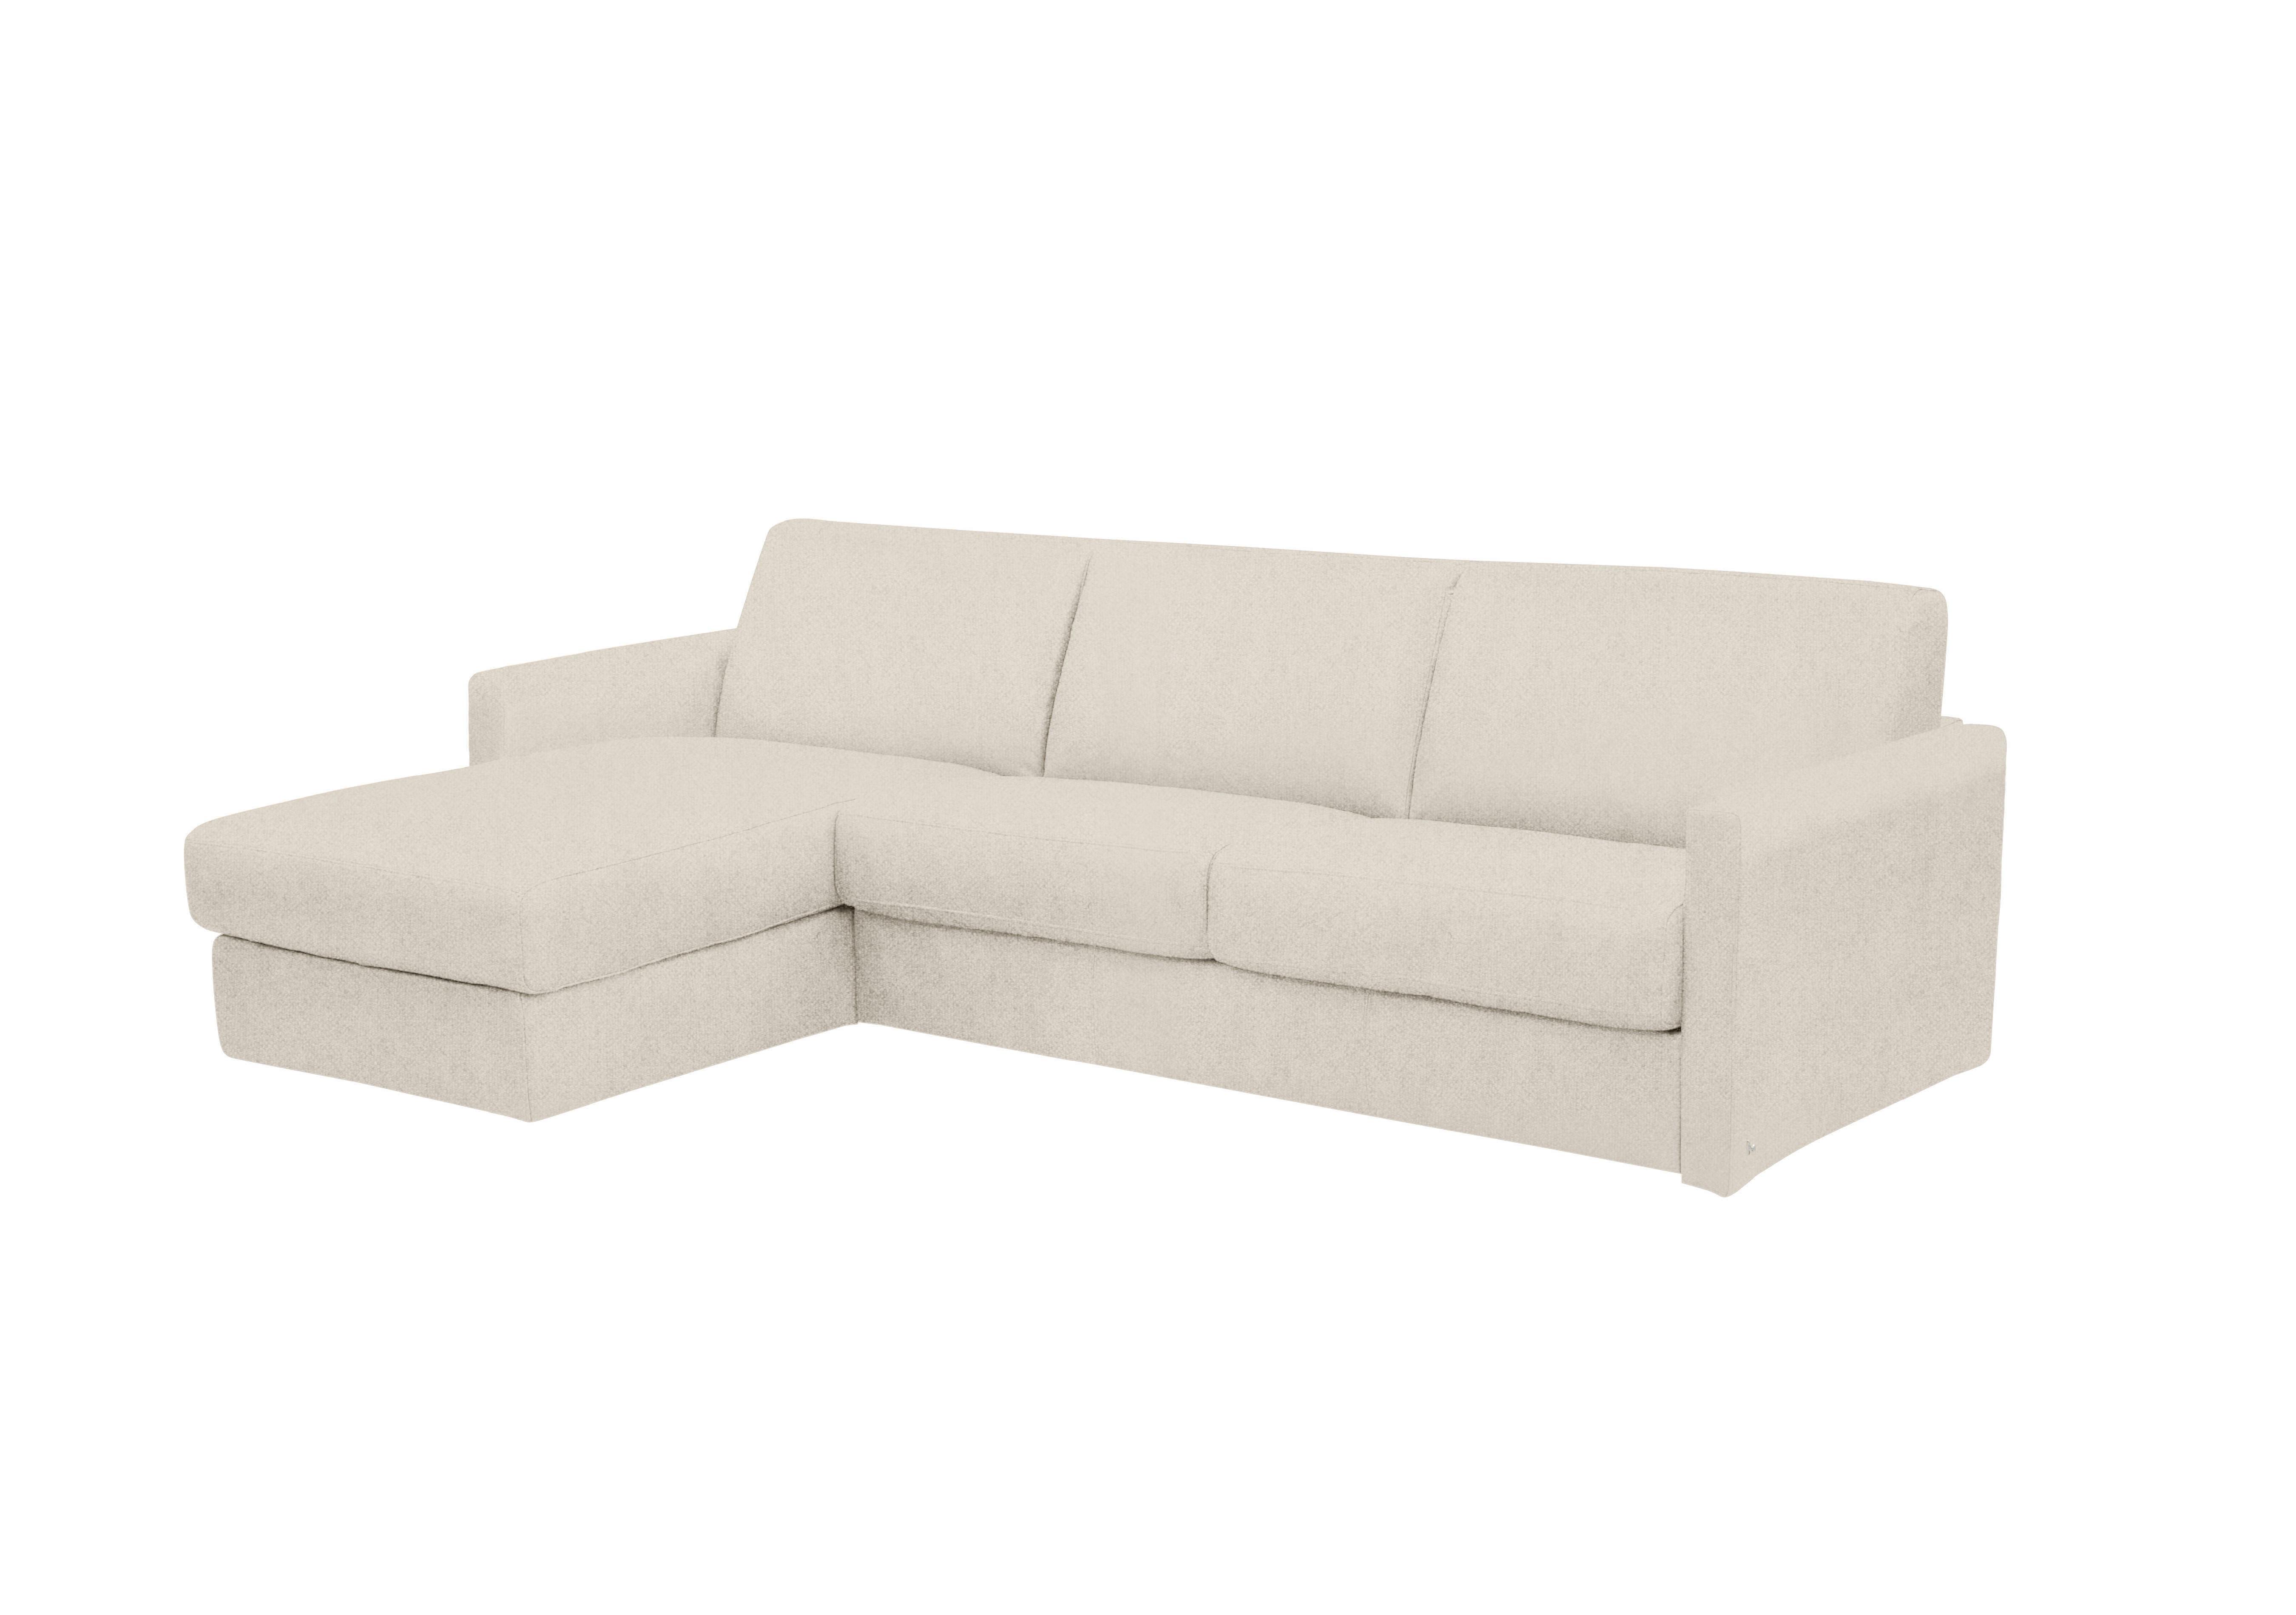 Alcova 3 Seater Fabric Sofa Bed with Storage Chaise with Slim Arms in Fuente Beige on Furniture Village